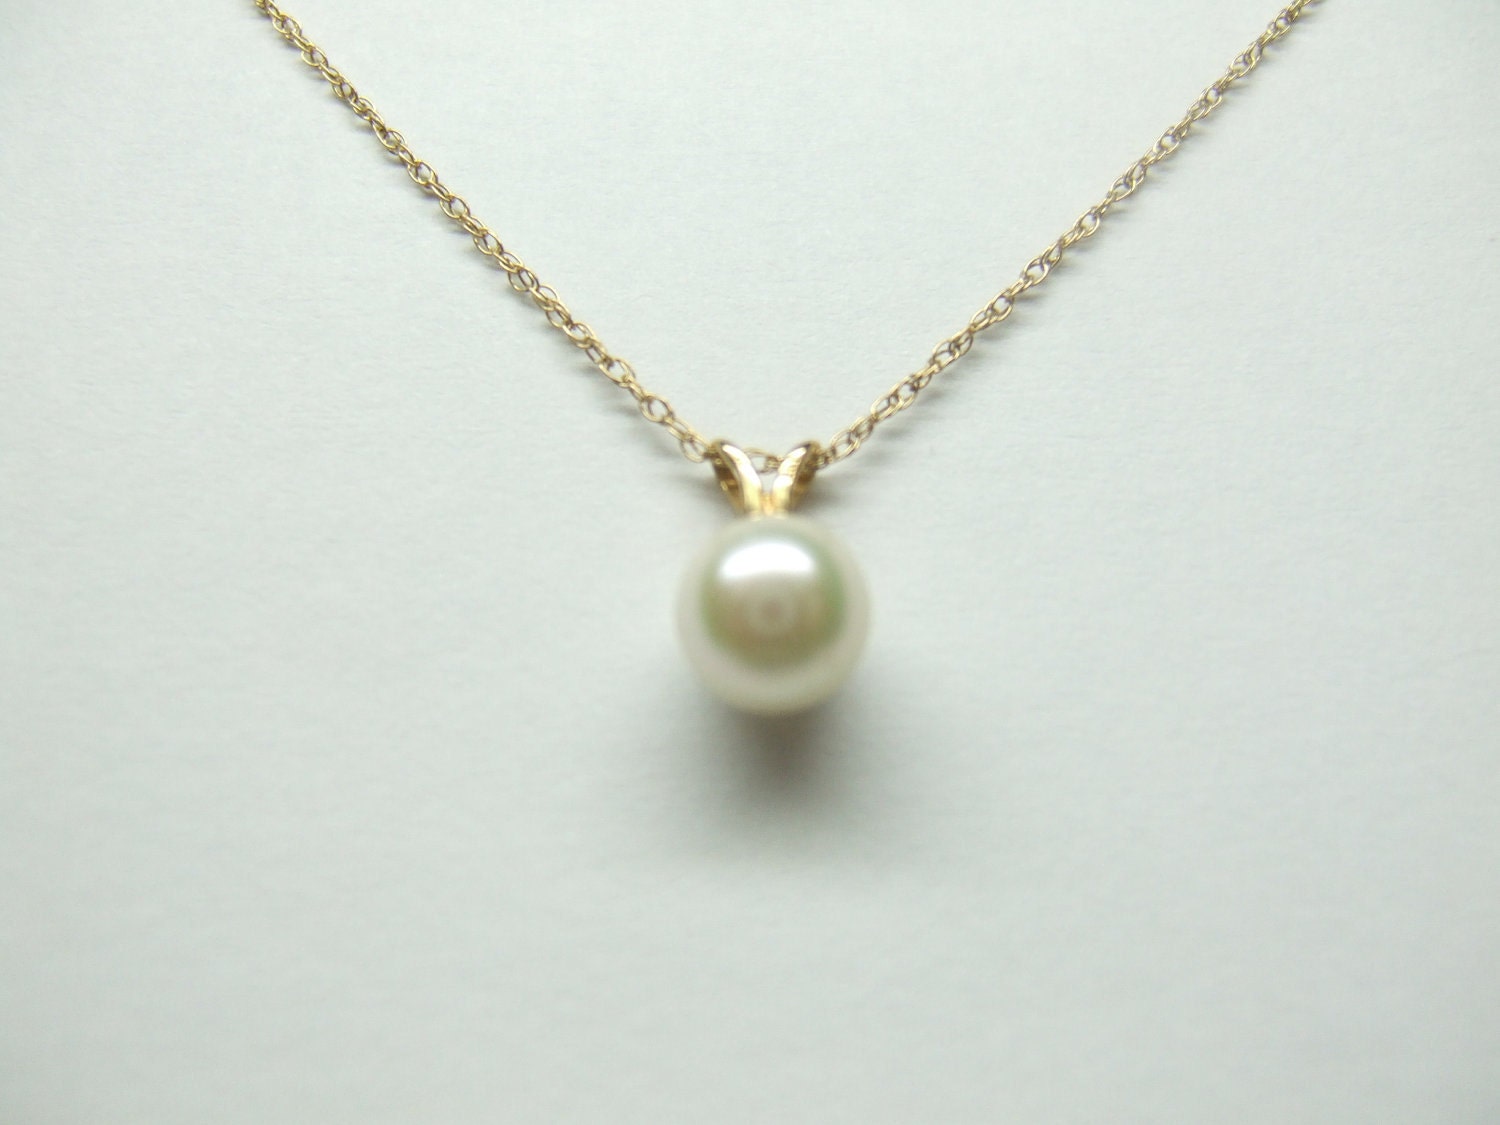 14k Vintage Pearl Pendant With Thin Gold Chain by zitro1141